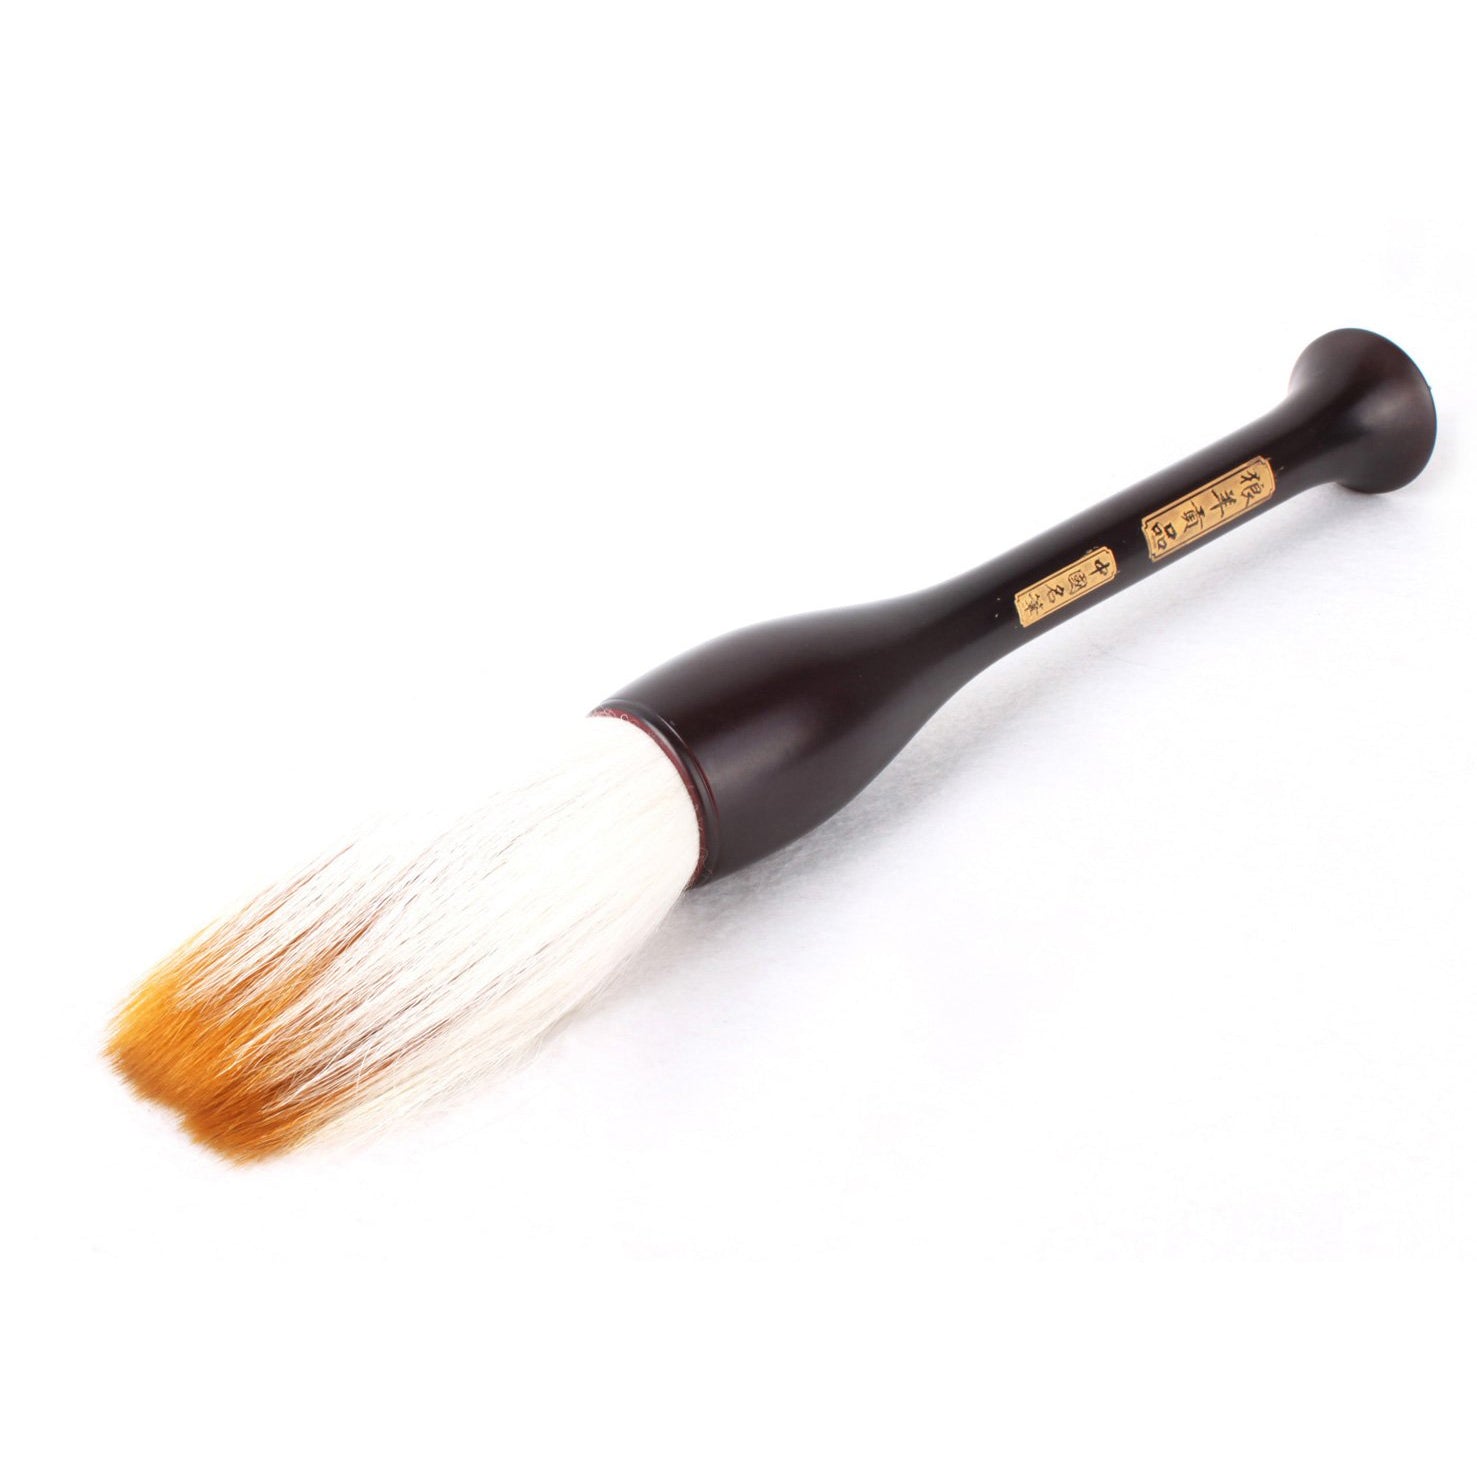 Tribute to the Emperor - An excellent brush made of Goat and Weasel Hair with a Large Tip for Calligraphy Writing and Sumi-e Painting